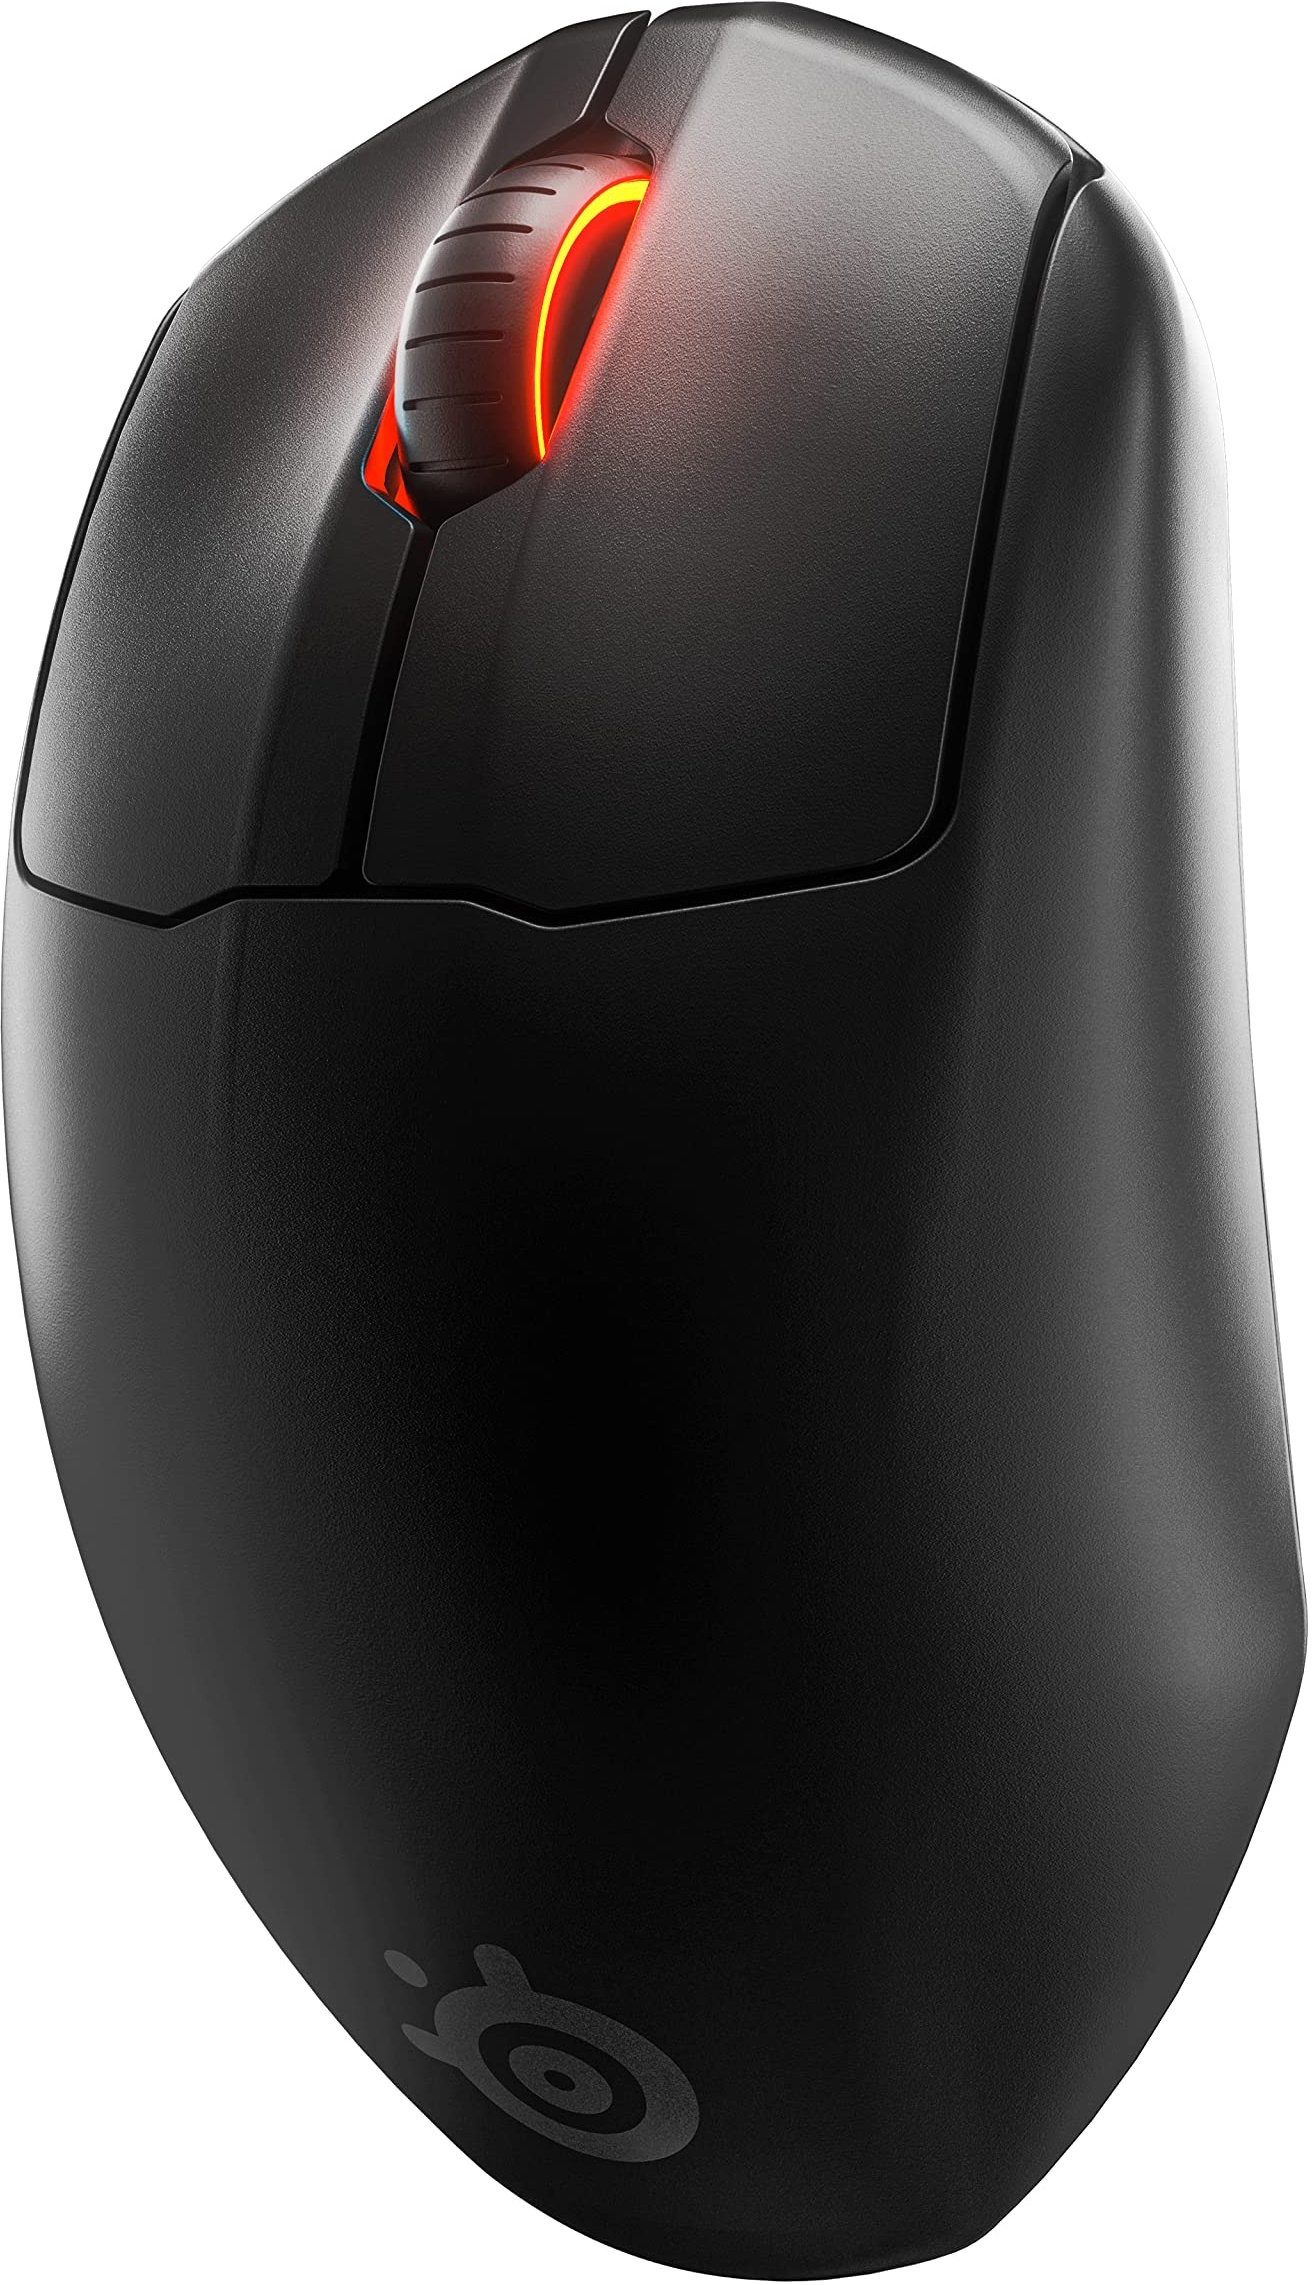 SteelSeries Prime Wireless FPS Gaming Mouse with Magnetic Optical Switches and 5 Programmable Buttons USB-C 18,000 CPI TrueMove Air Optical Sensor Prism RGB Lighting - Black